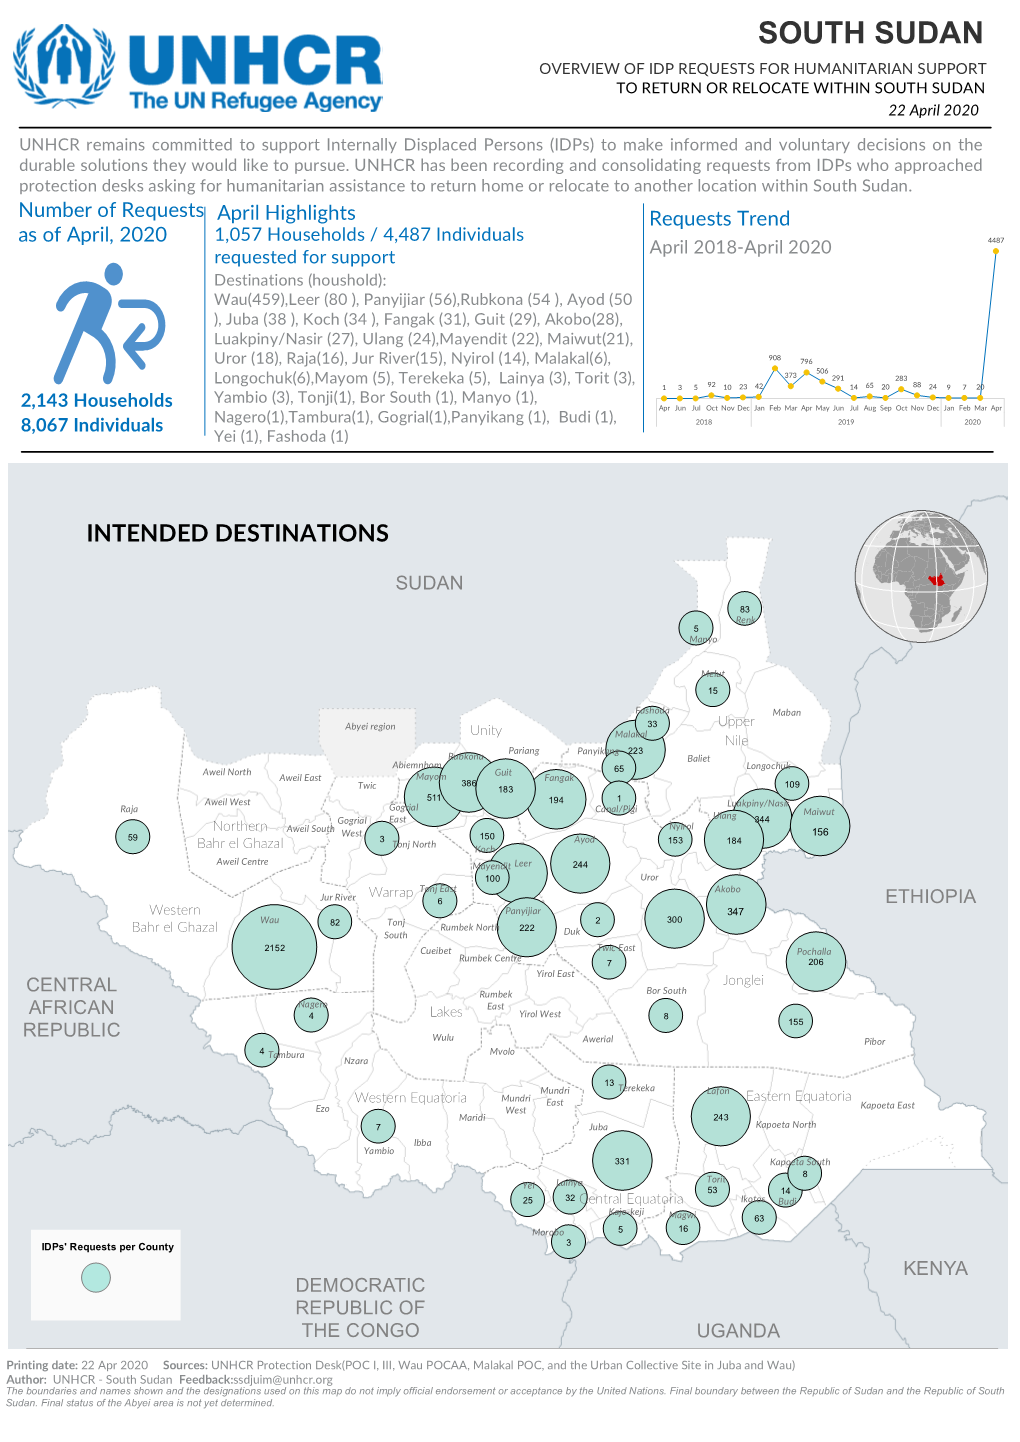 SOUTH SUDAN OVERVIEW of IDP REQUESTS for HUMANITARIAN SUPPORT to RETURN OR RELOCATE WITHIN SOUTH SUDAN 22 April 2020